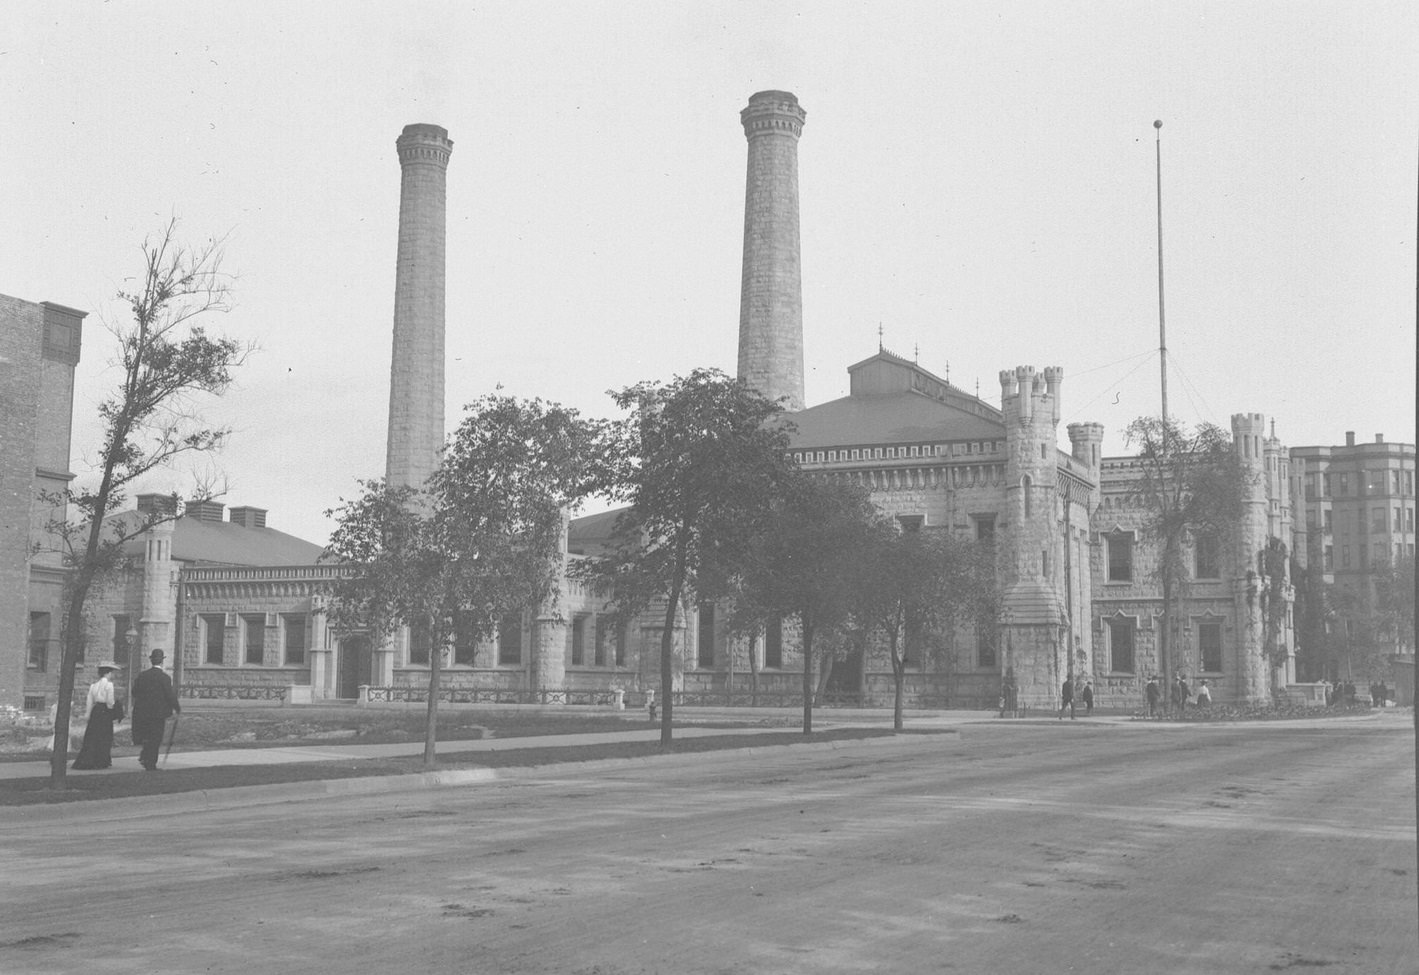 Chicago Avenue Pumping Station, Chicago, Illinois, 1916.